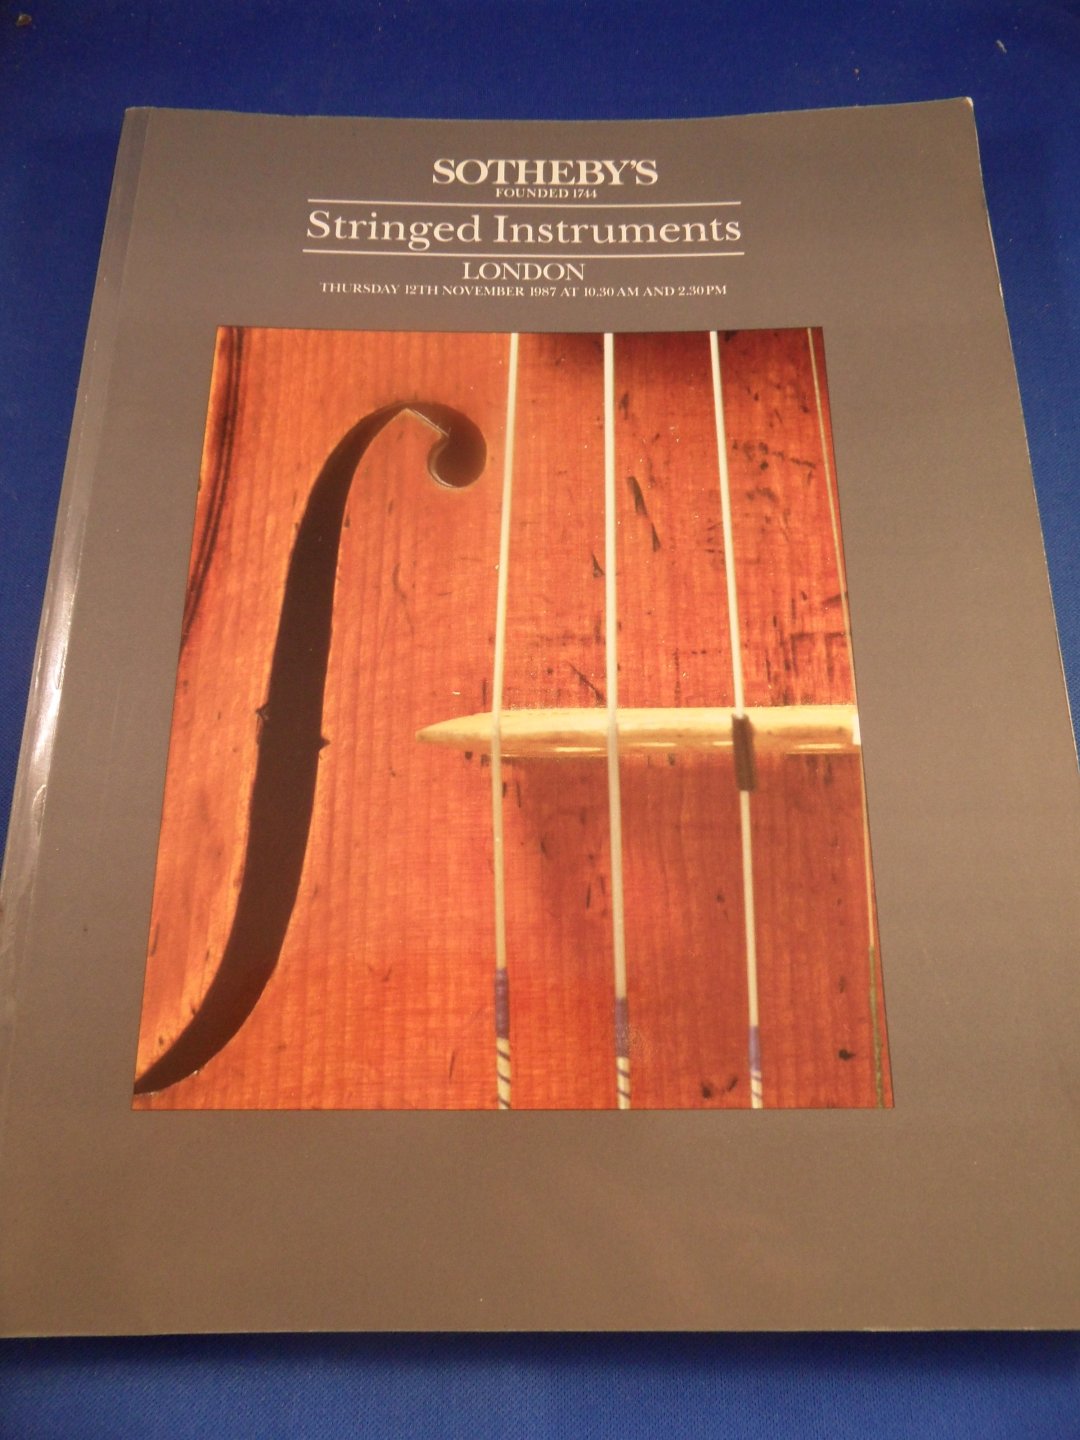 Sotheby's - Stringed instruments. Comprising violins, violas, violoncellos, double basses, bows and organological books